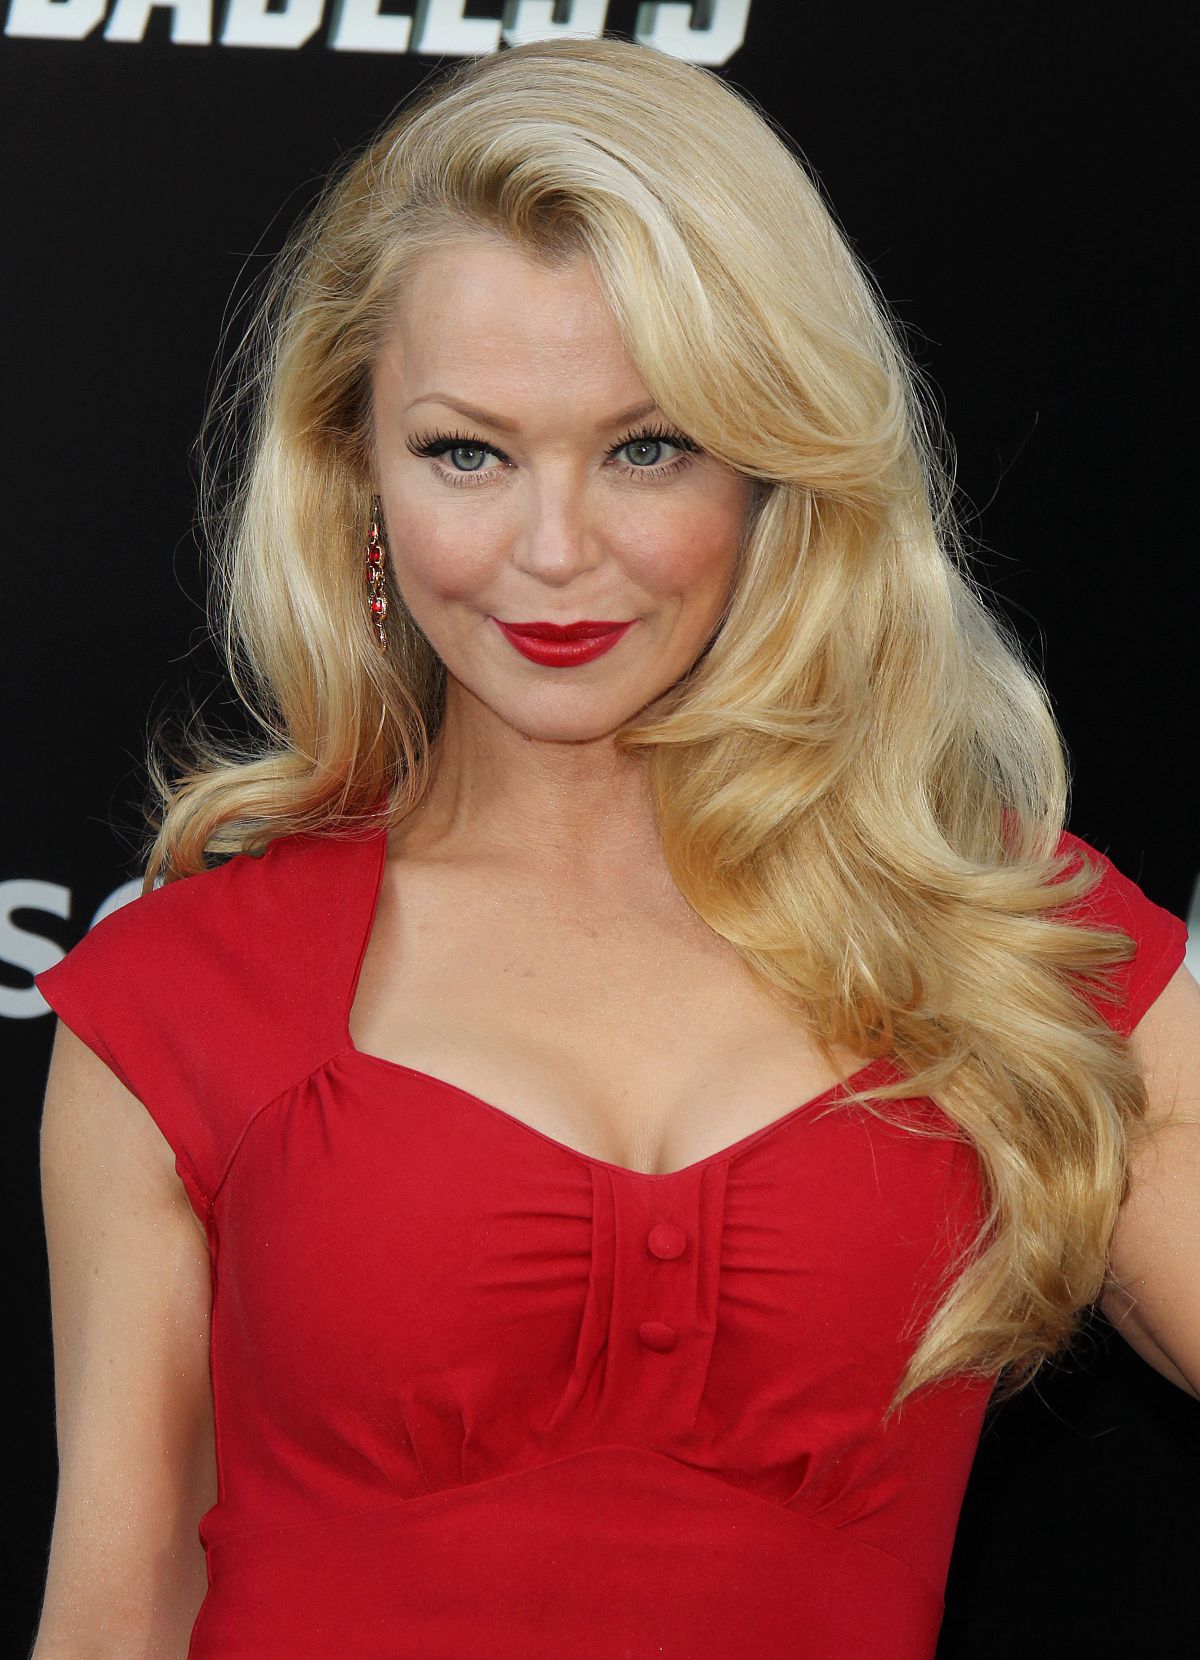 CHARLOTTE ROSS at The Expendables 3 Premiere in Hollywood HawtCelebs